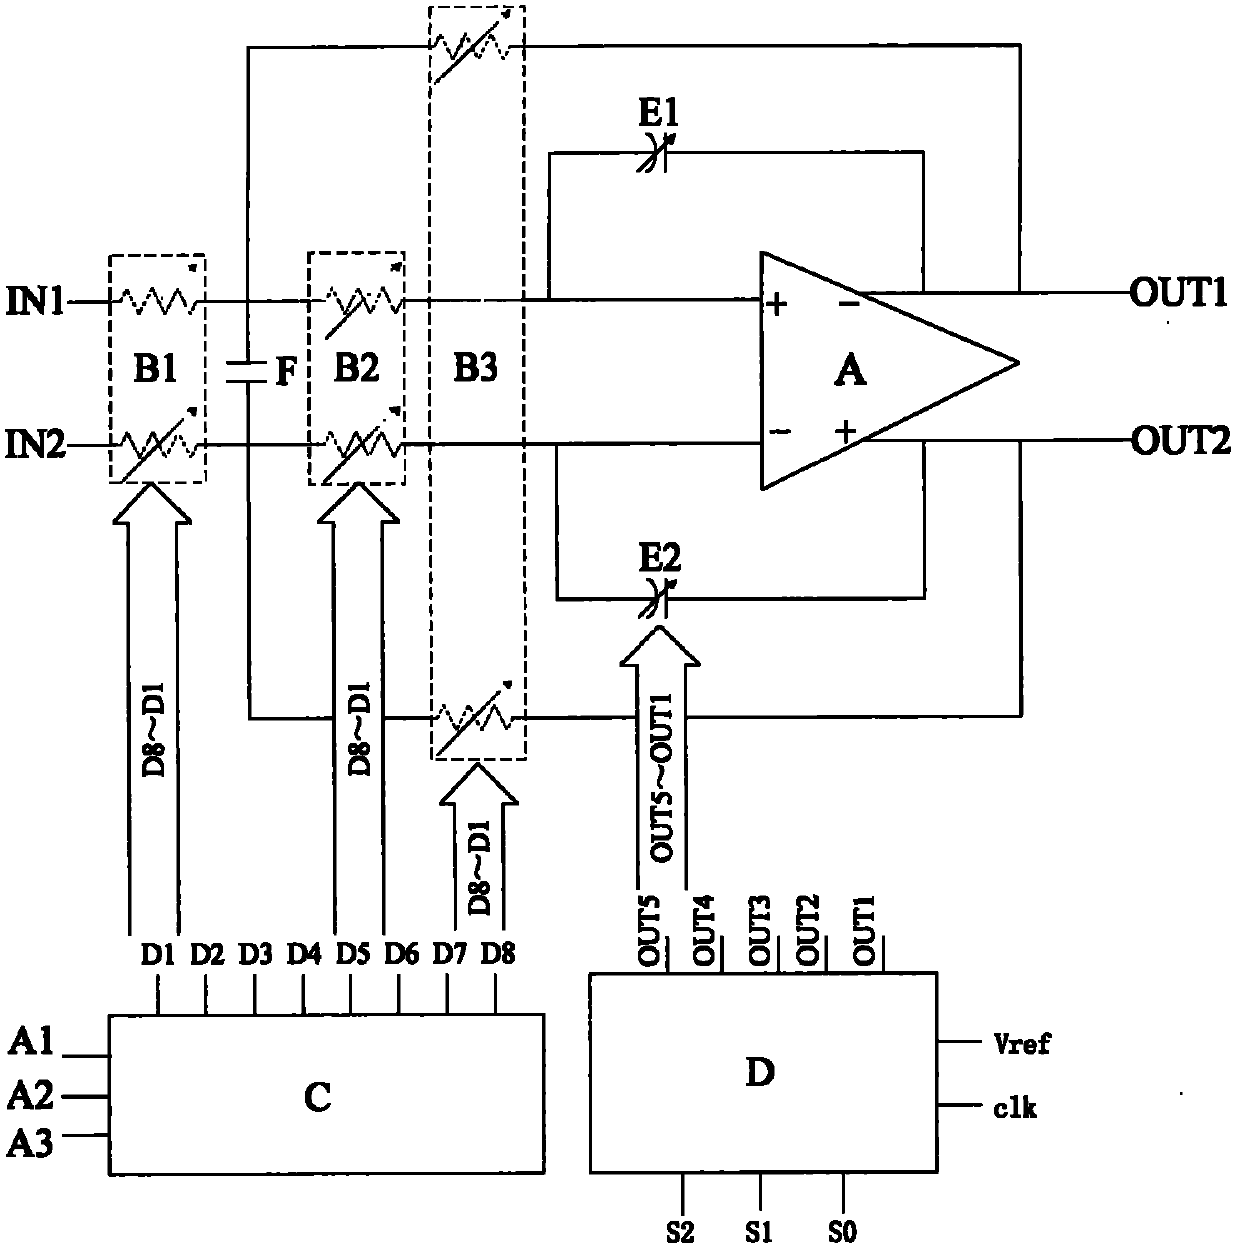 Automatic frequency calibration channel selection filter for multi-frequency multi-mode wireless transceiver